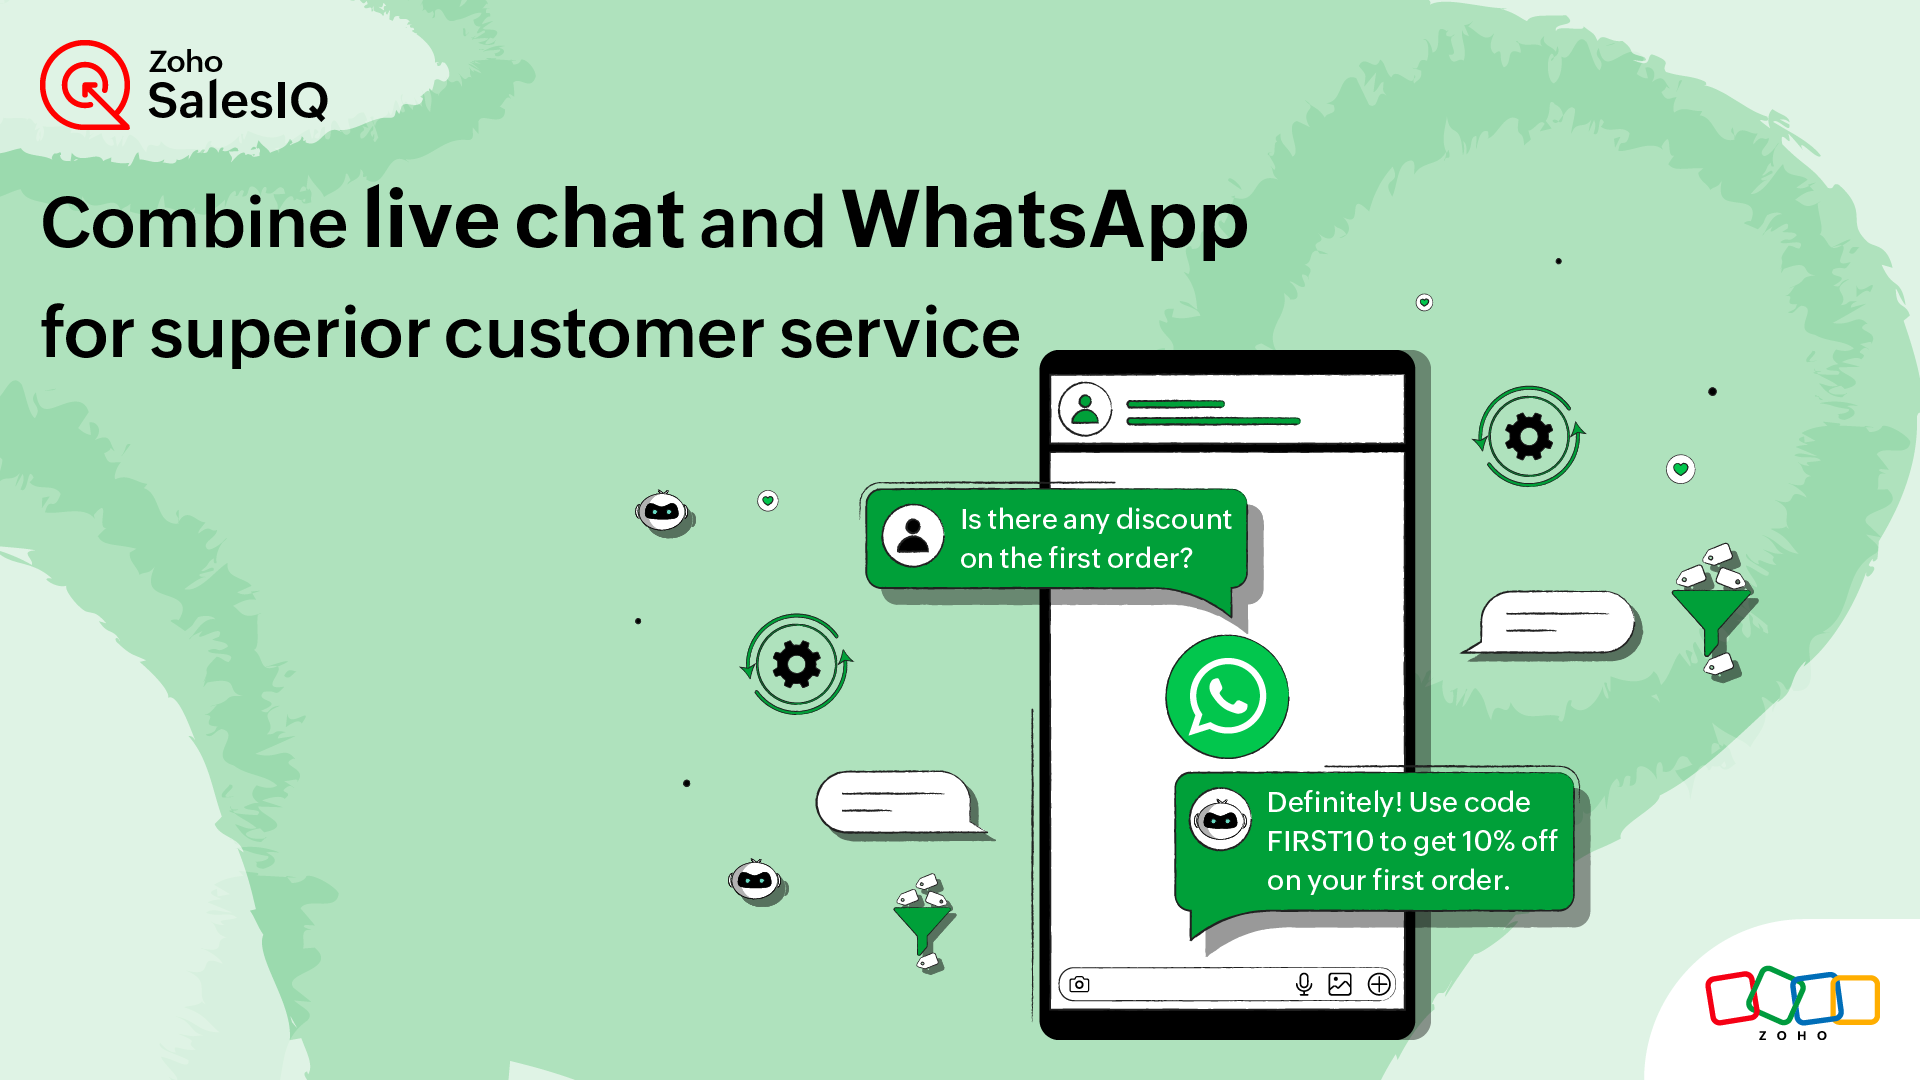 Combine live chat and WhatsApp for superior customer service